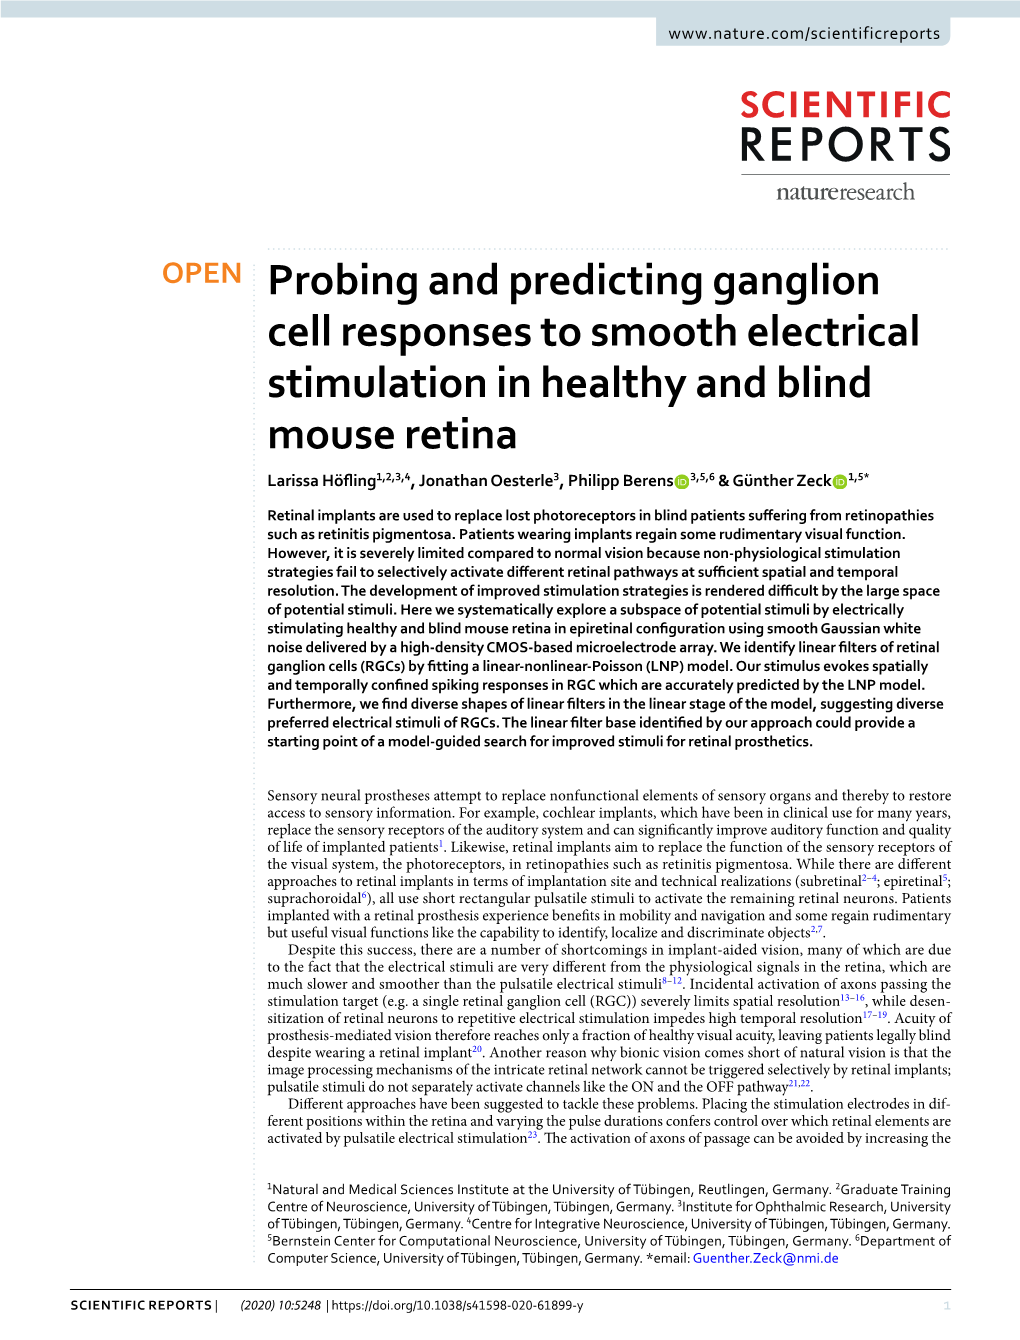 Probing and Predicting Ganglion Cell Responses to Smooth Electrical